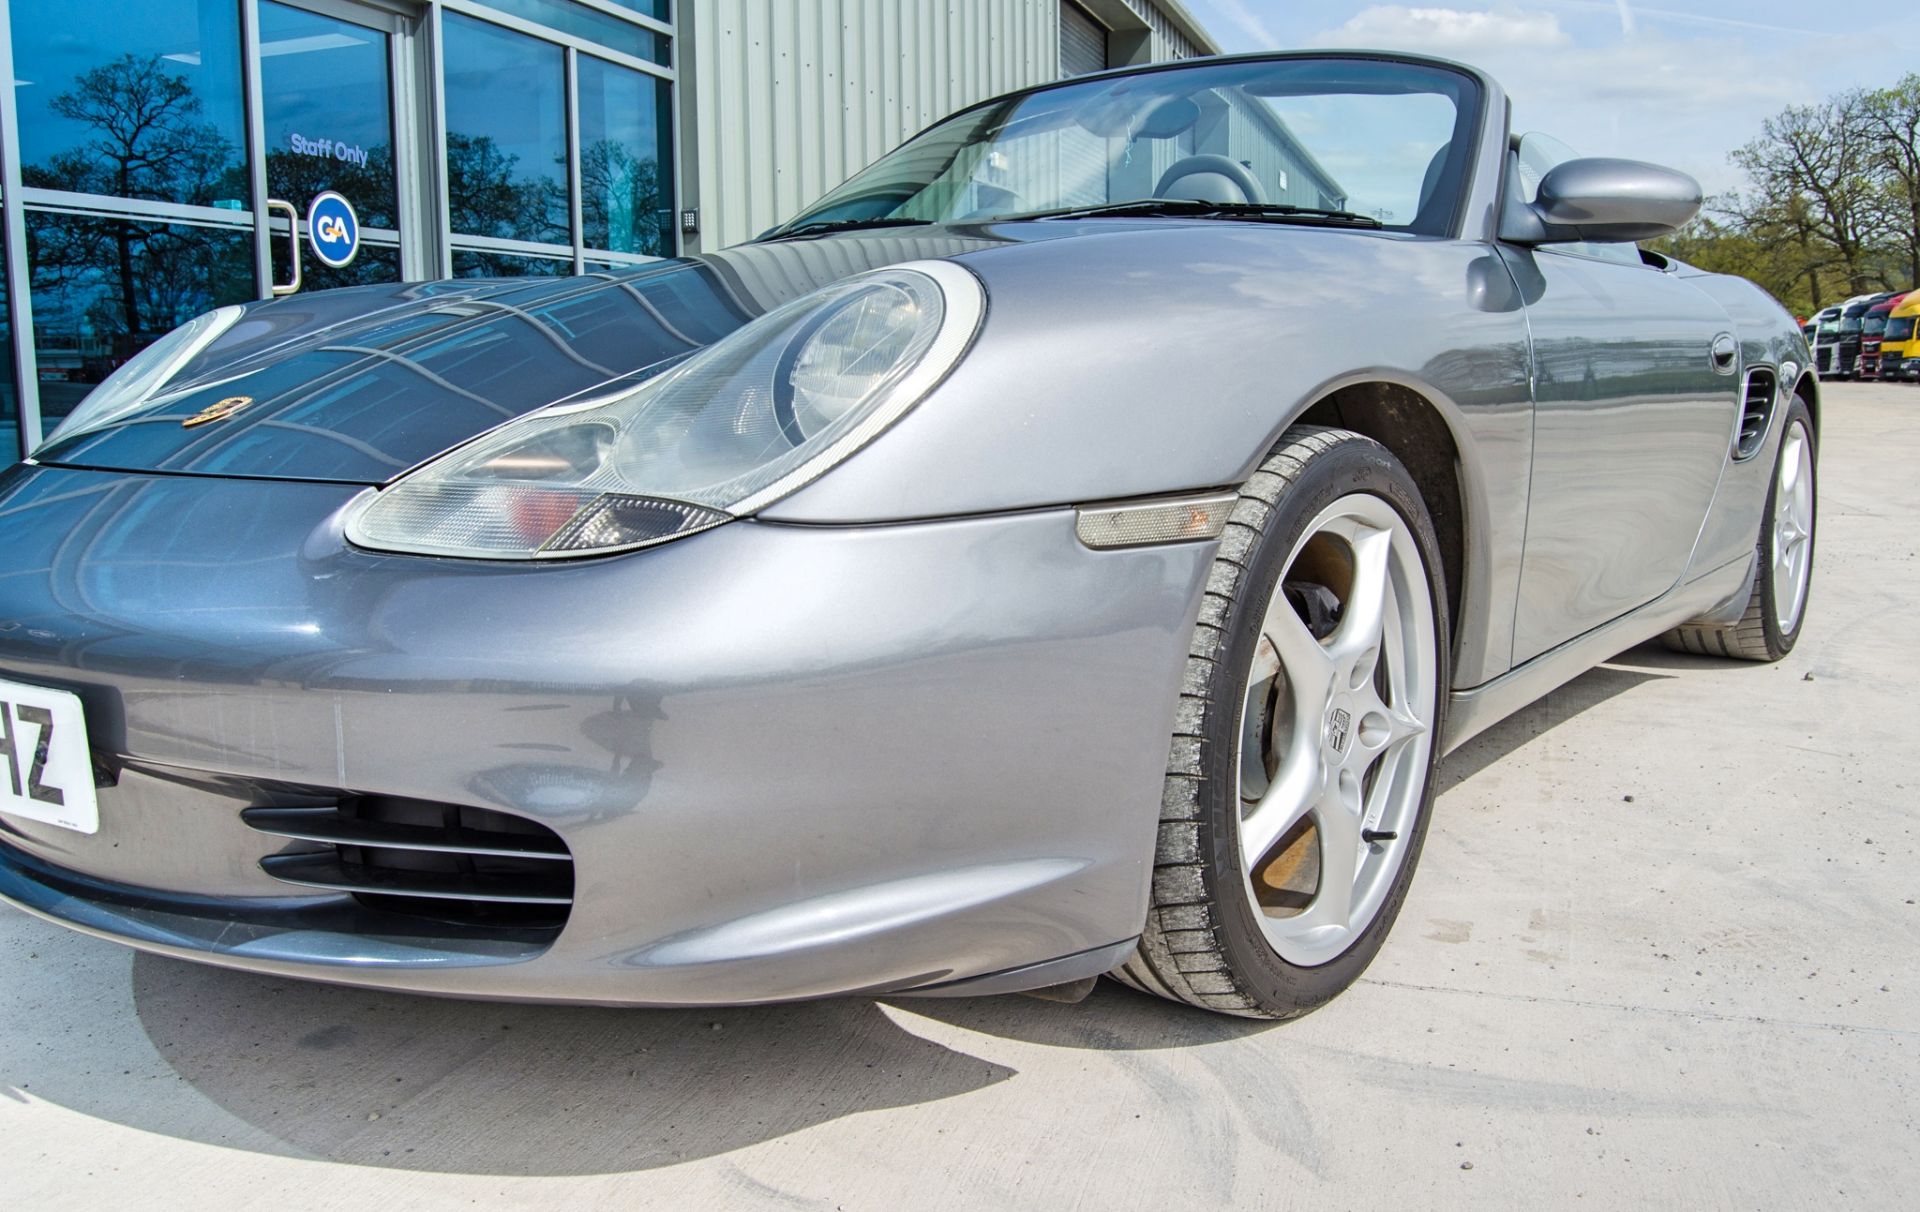 2003 Porsche Boxster 2.7 5 speed manual convertible roadster - Image 21 of 50